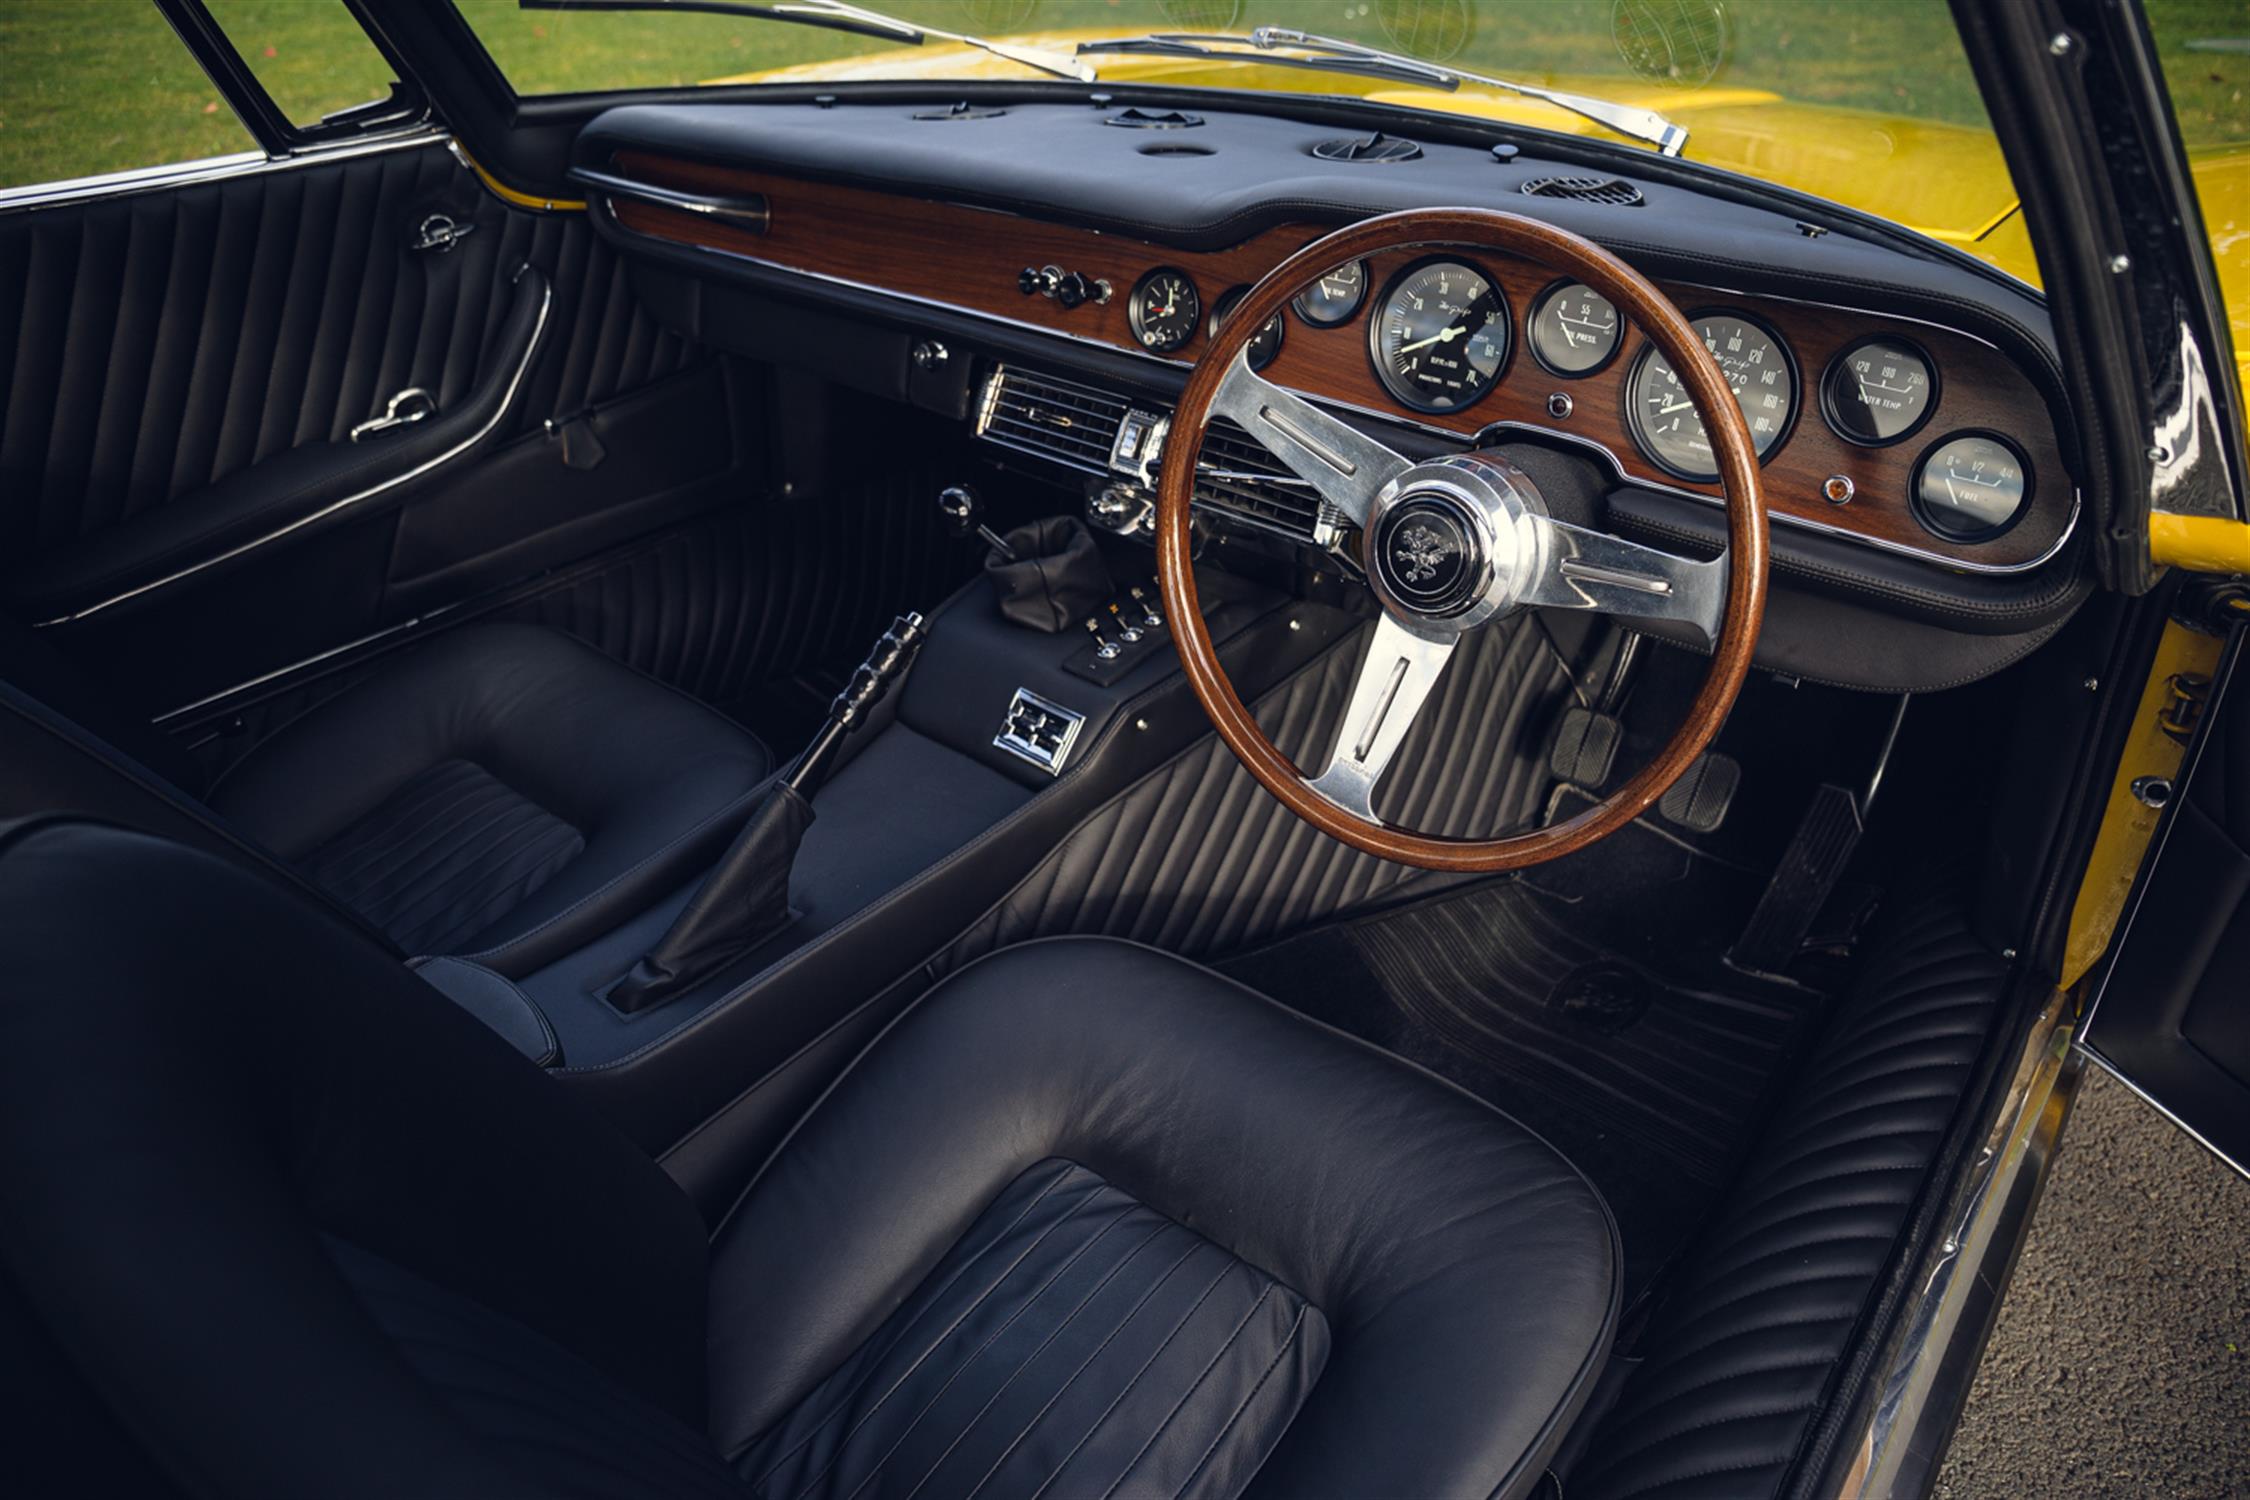 1967 Iso Grifo Series 1 GL350 - Image 3 of 10